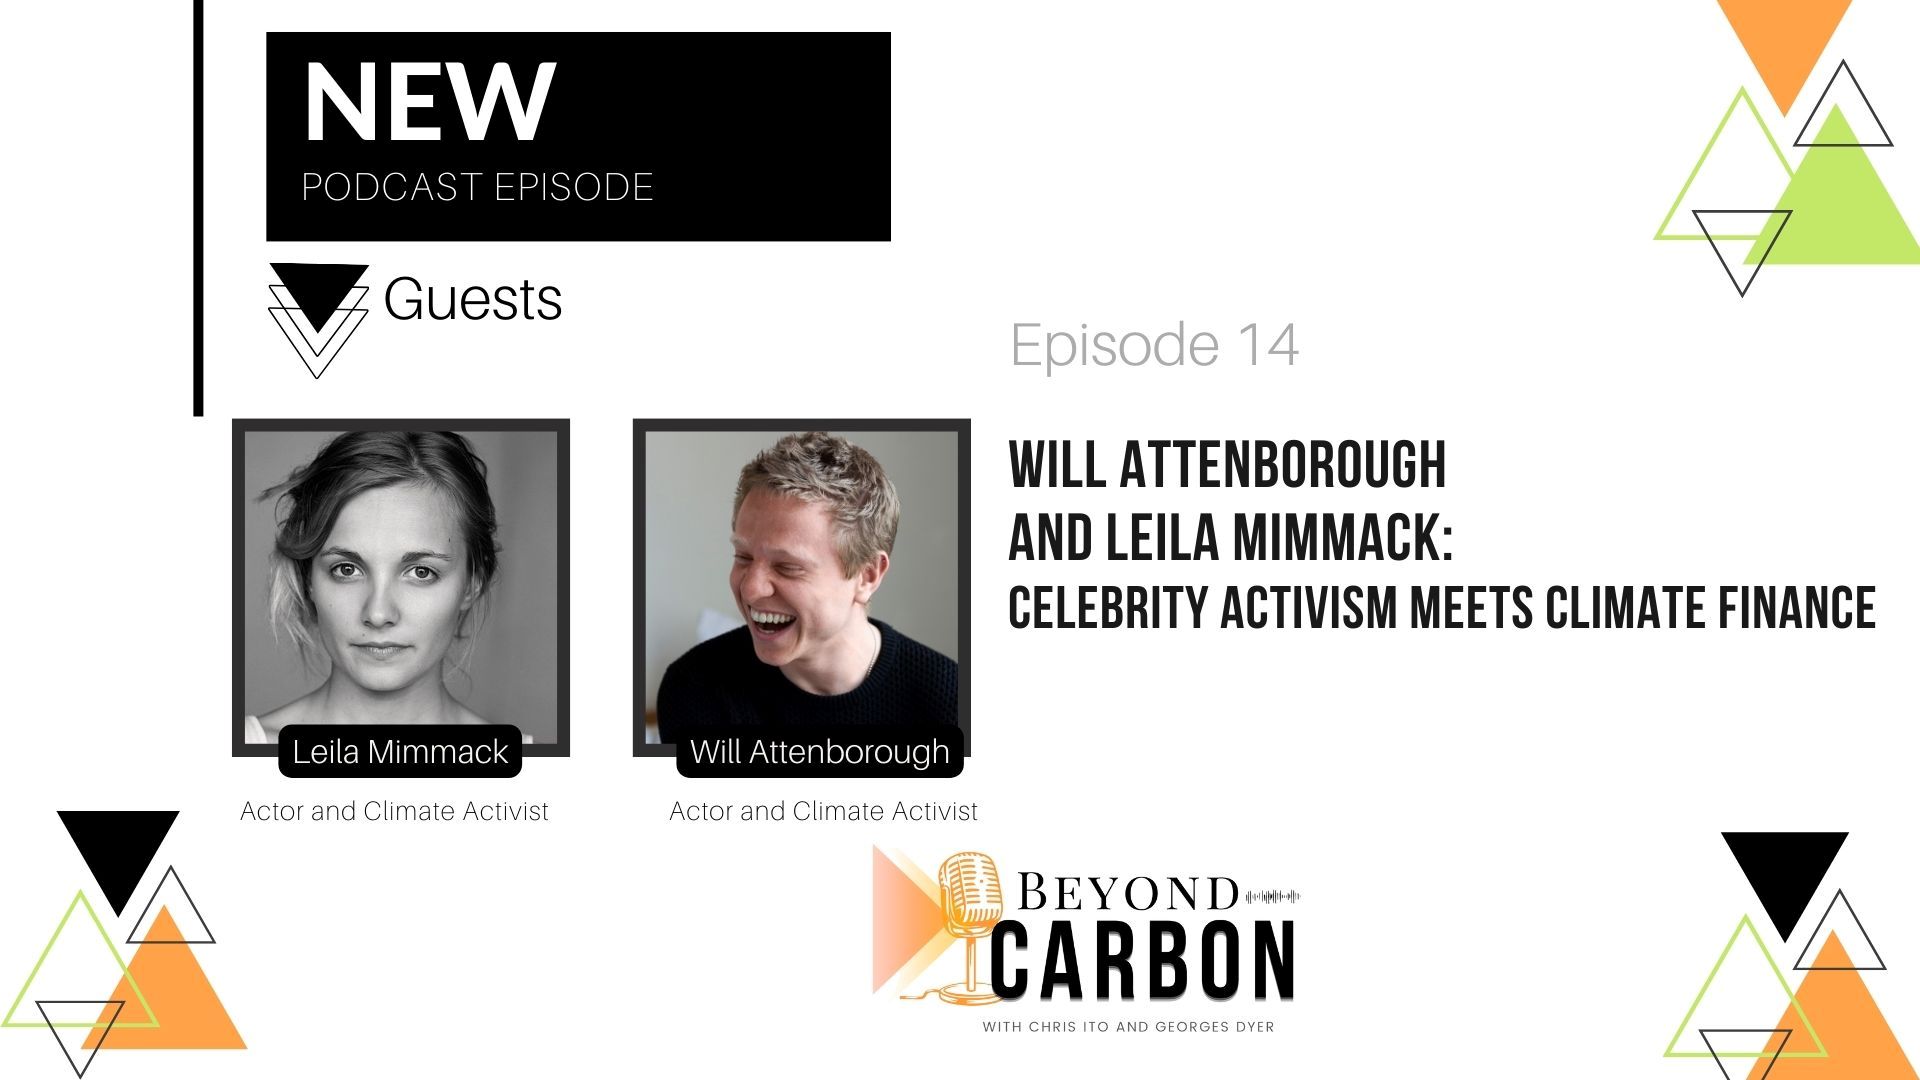 Will Attenborough and Leila Mimmack: Beyond Carbon Episode 14